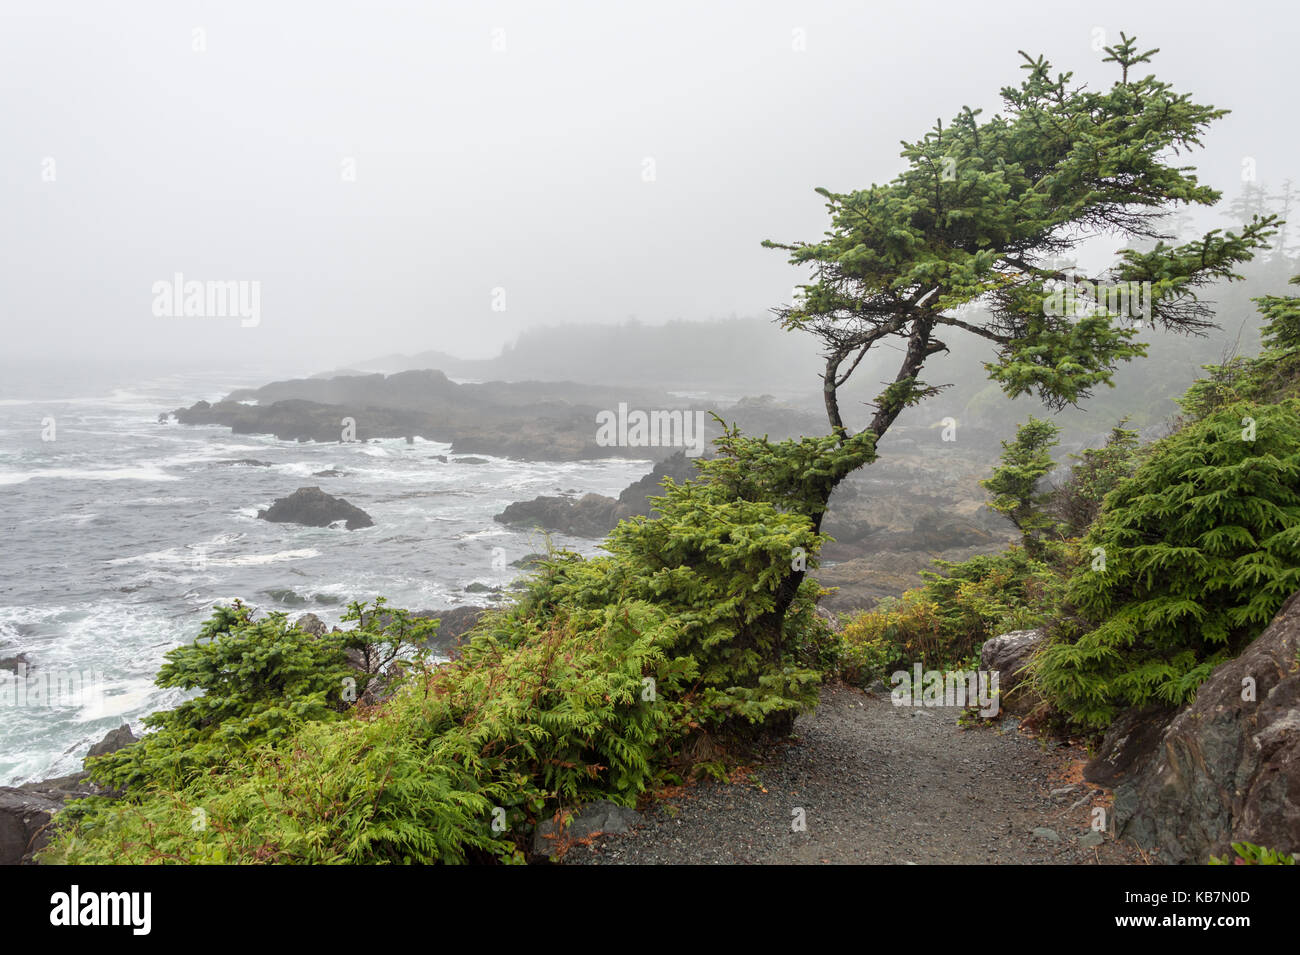 Ucluelet, British Columbia, Canada - 8 September 2017: West Pacific Trail near Ucluelet on a rainy day Stock Photo